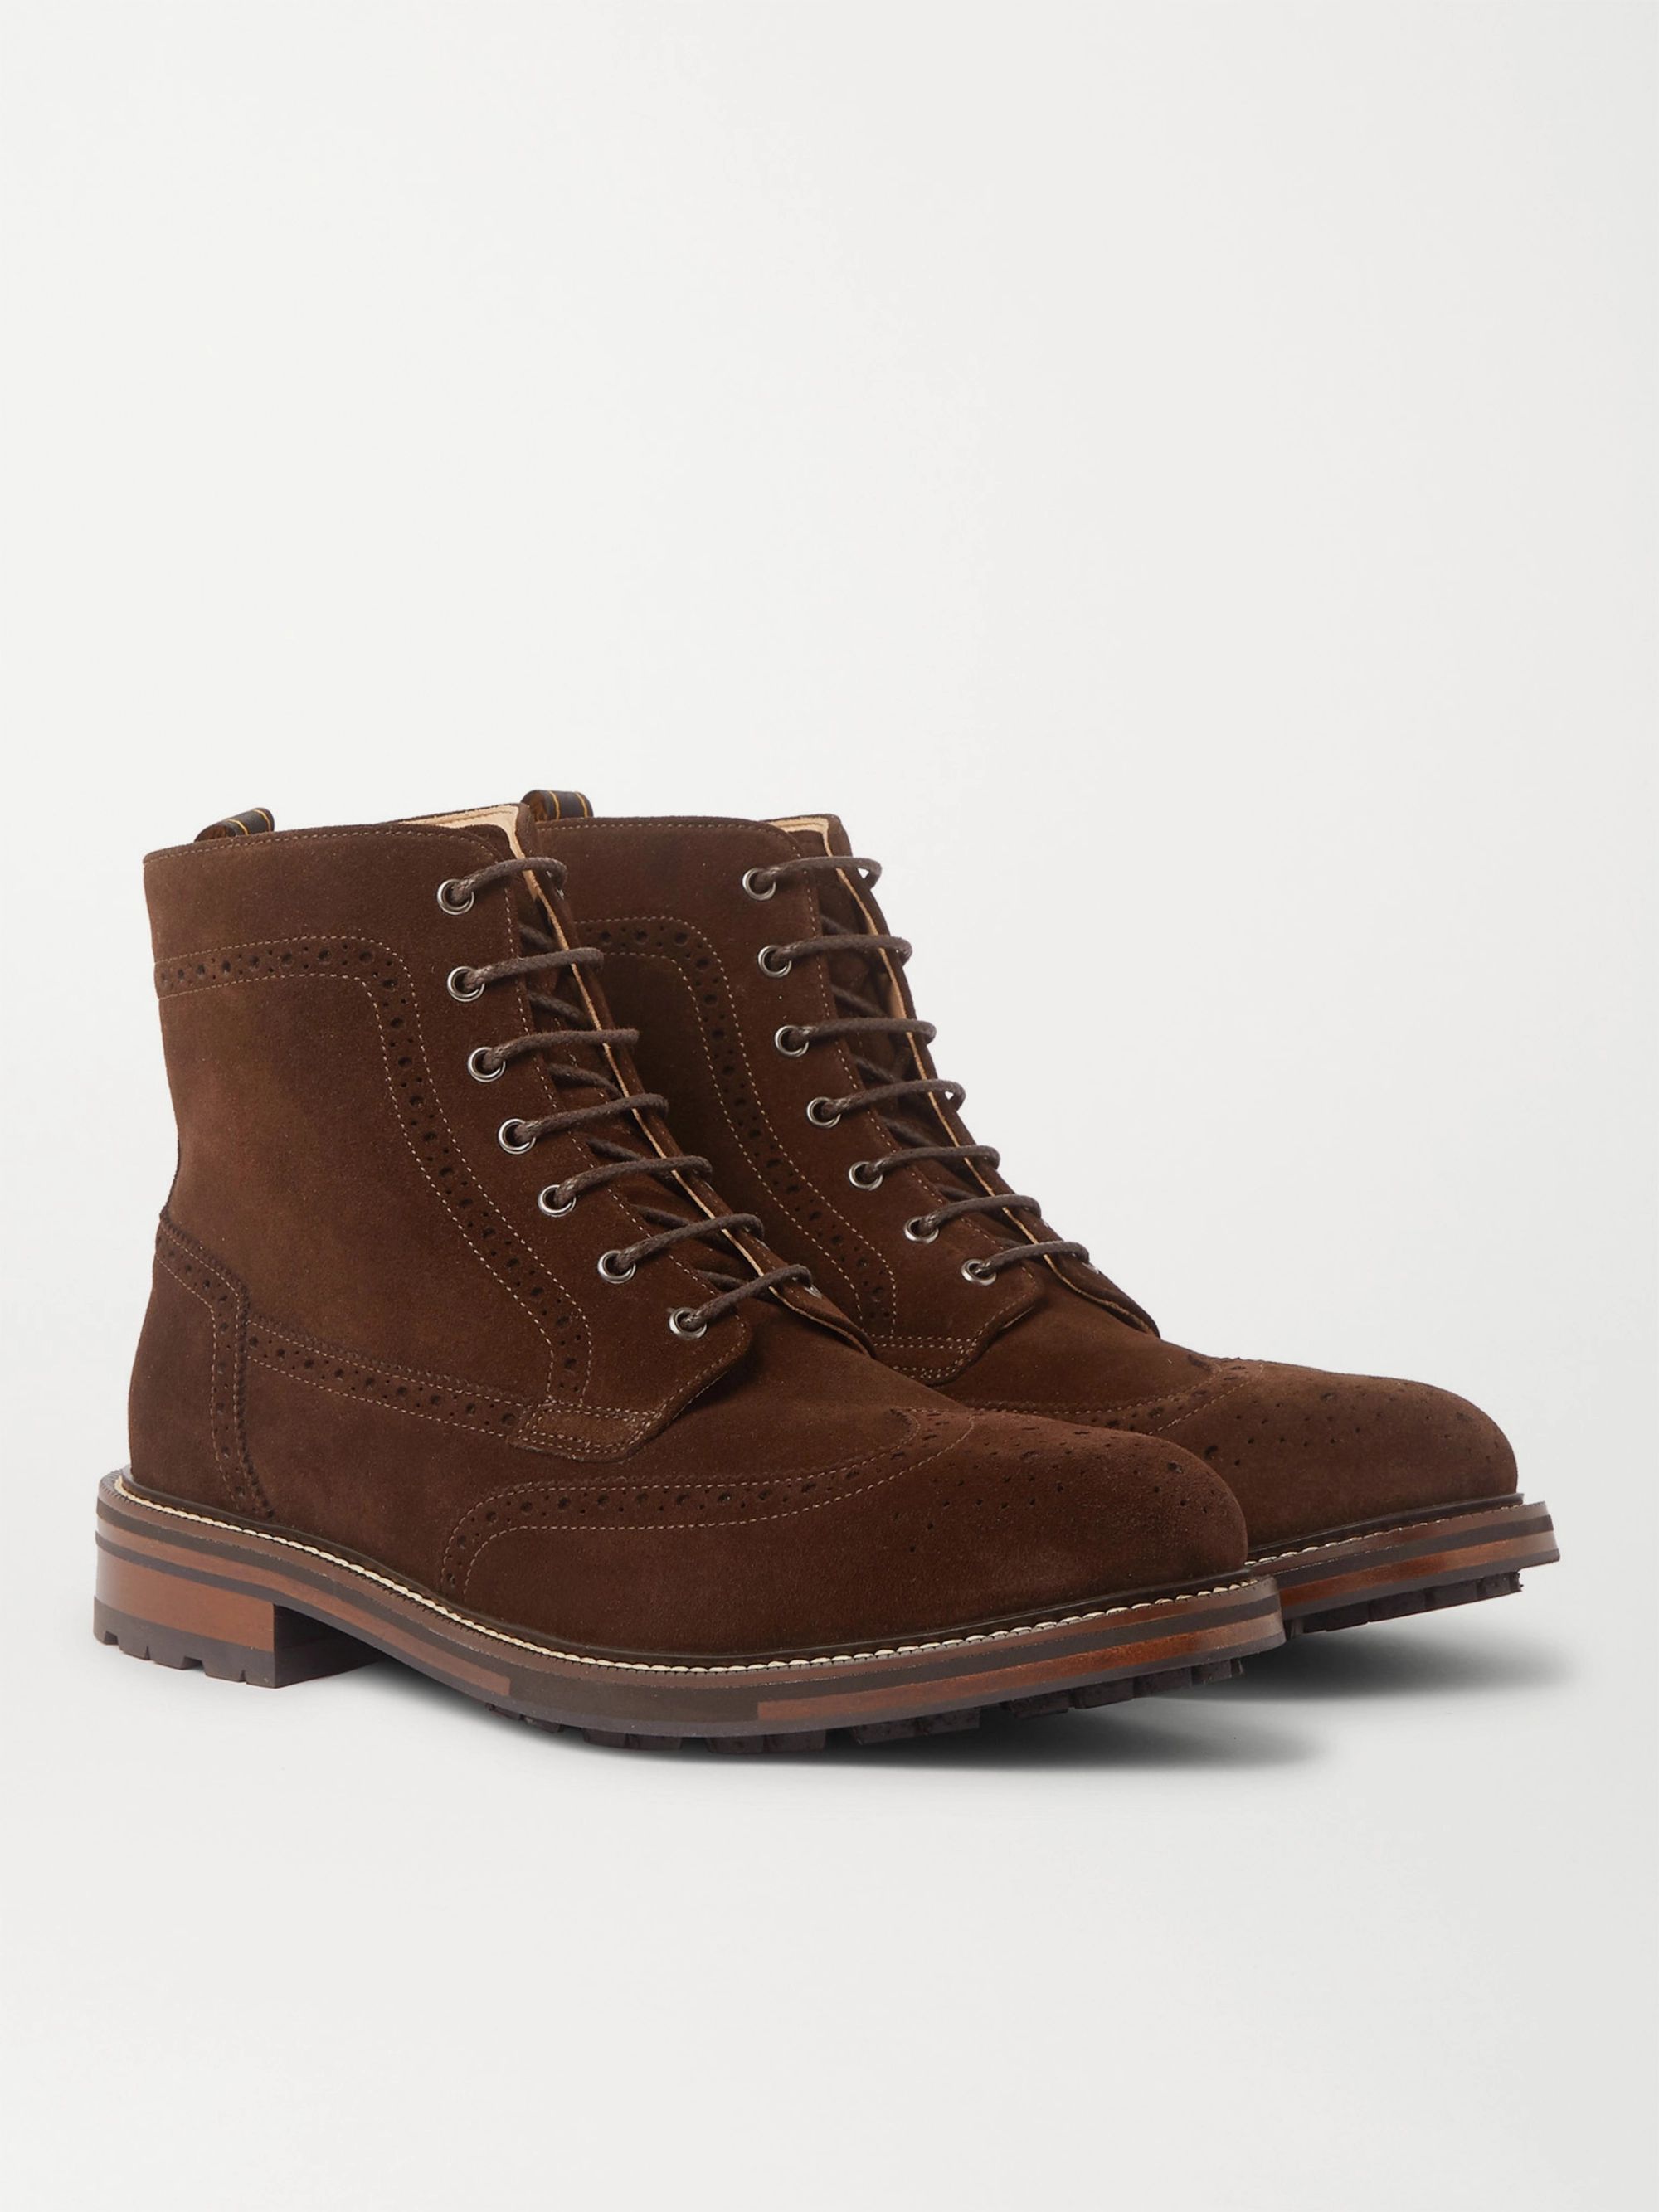 the suede brogue boot